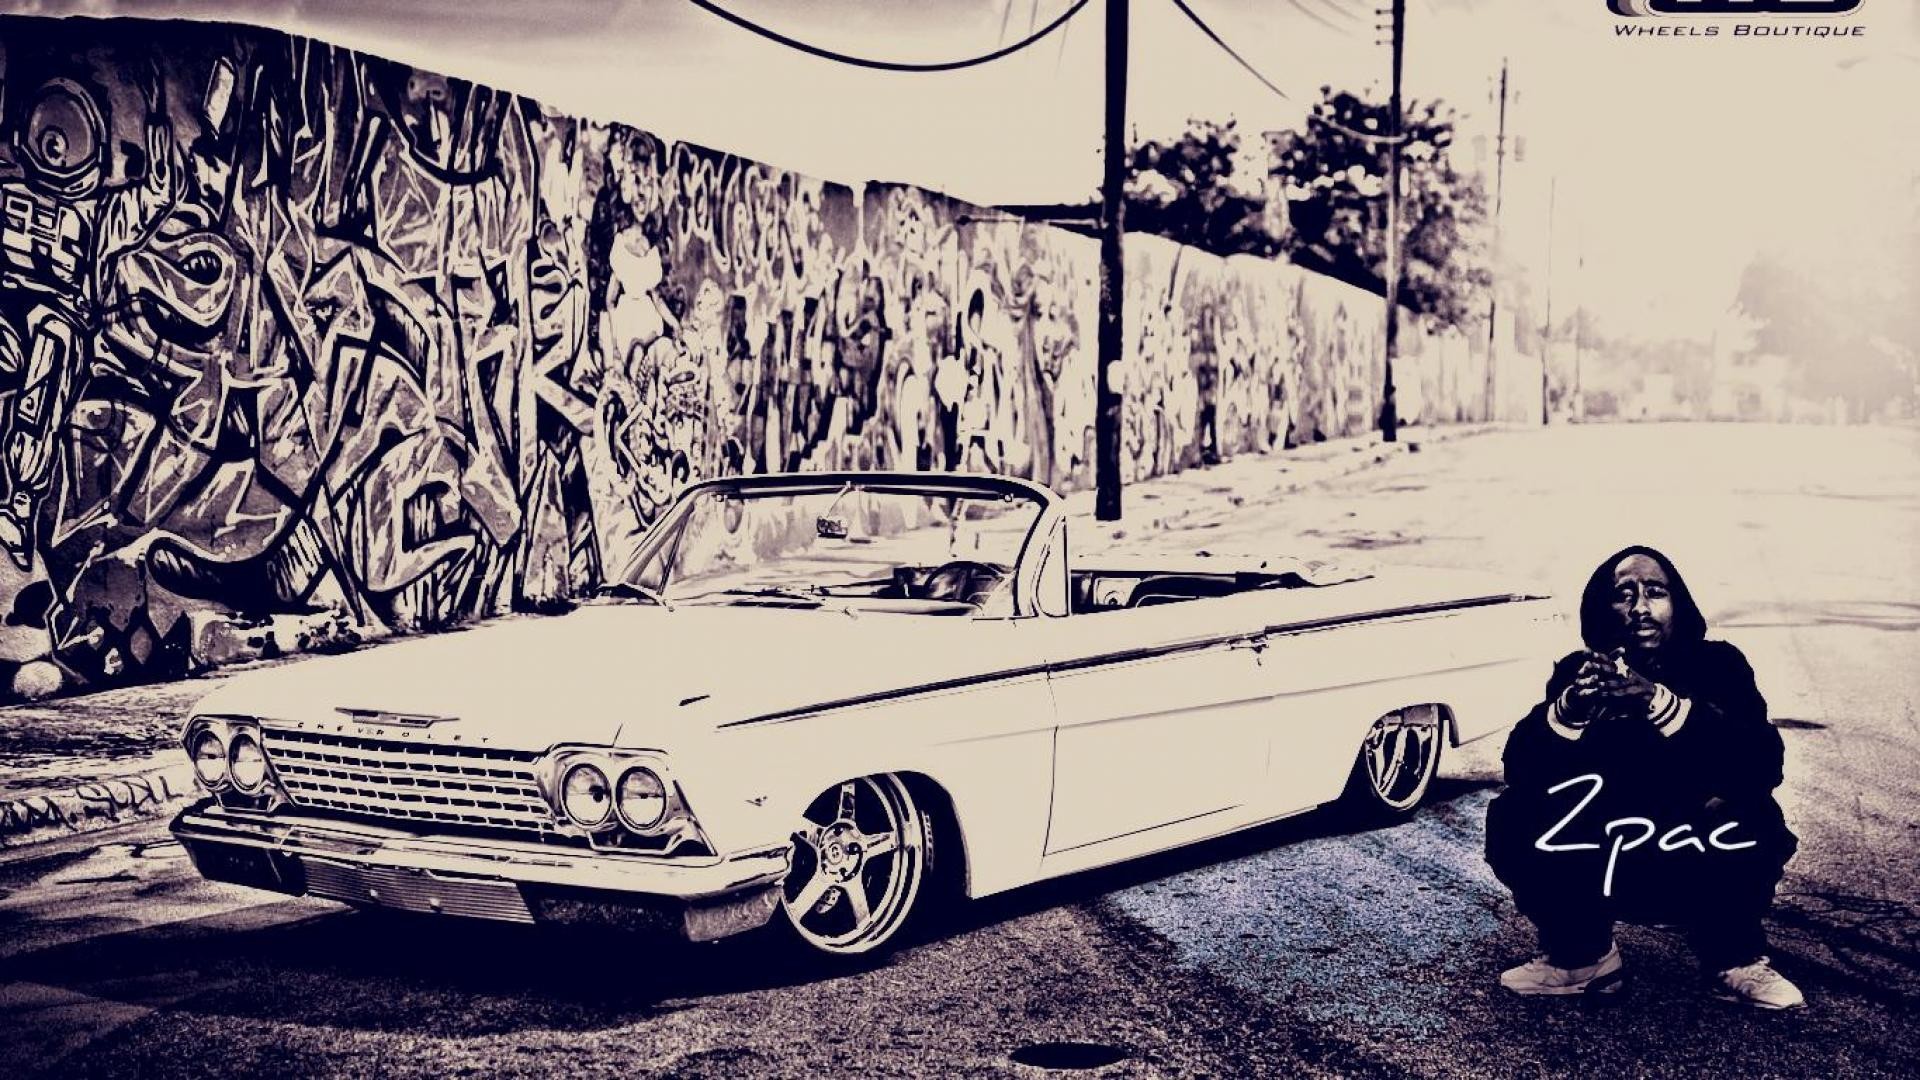 Lowrider background for your phone iPhone android, computer or